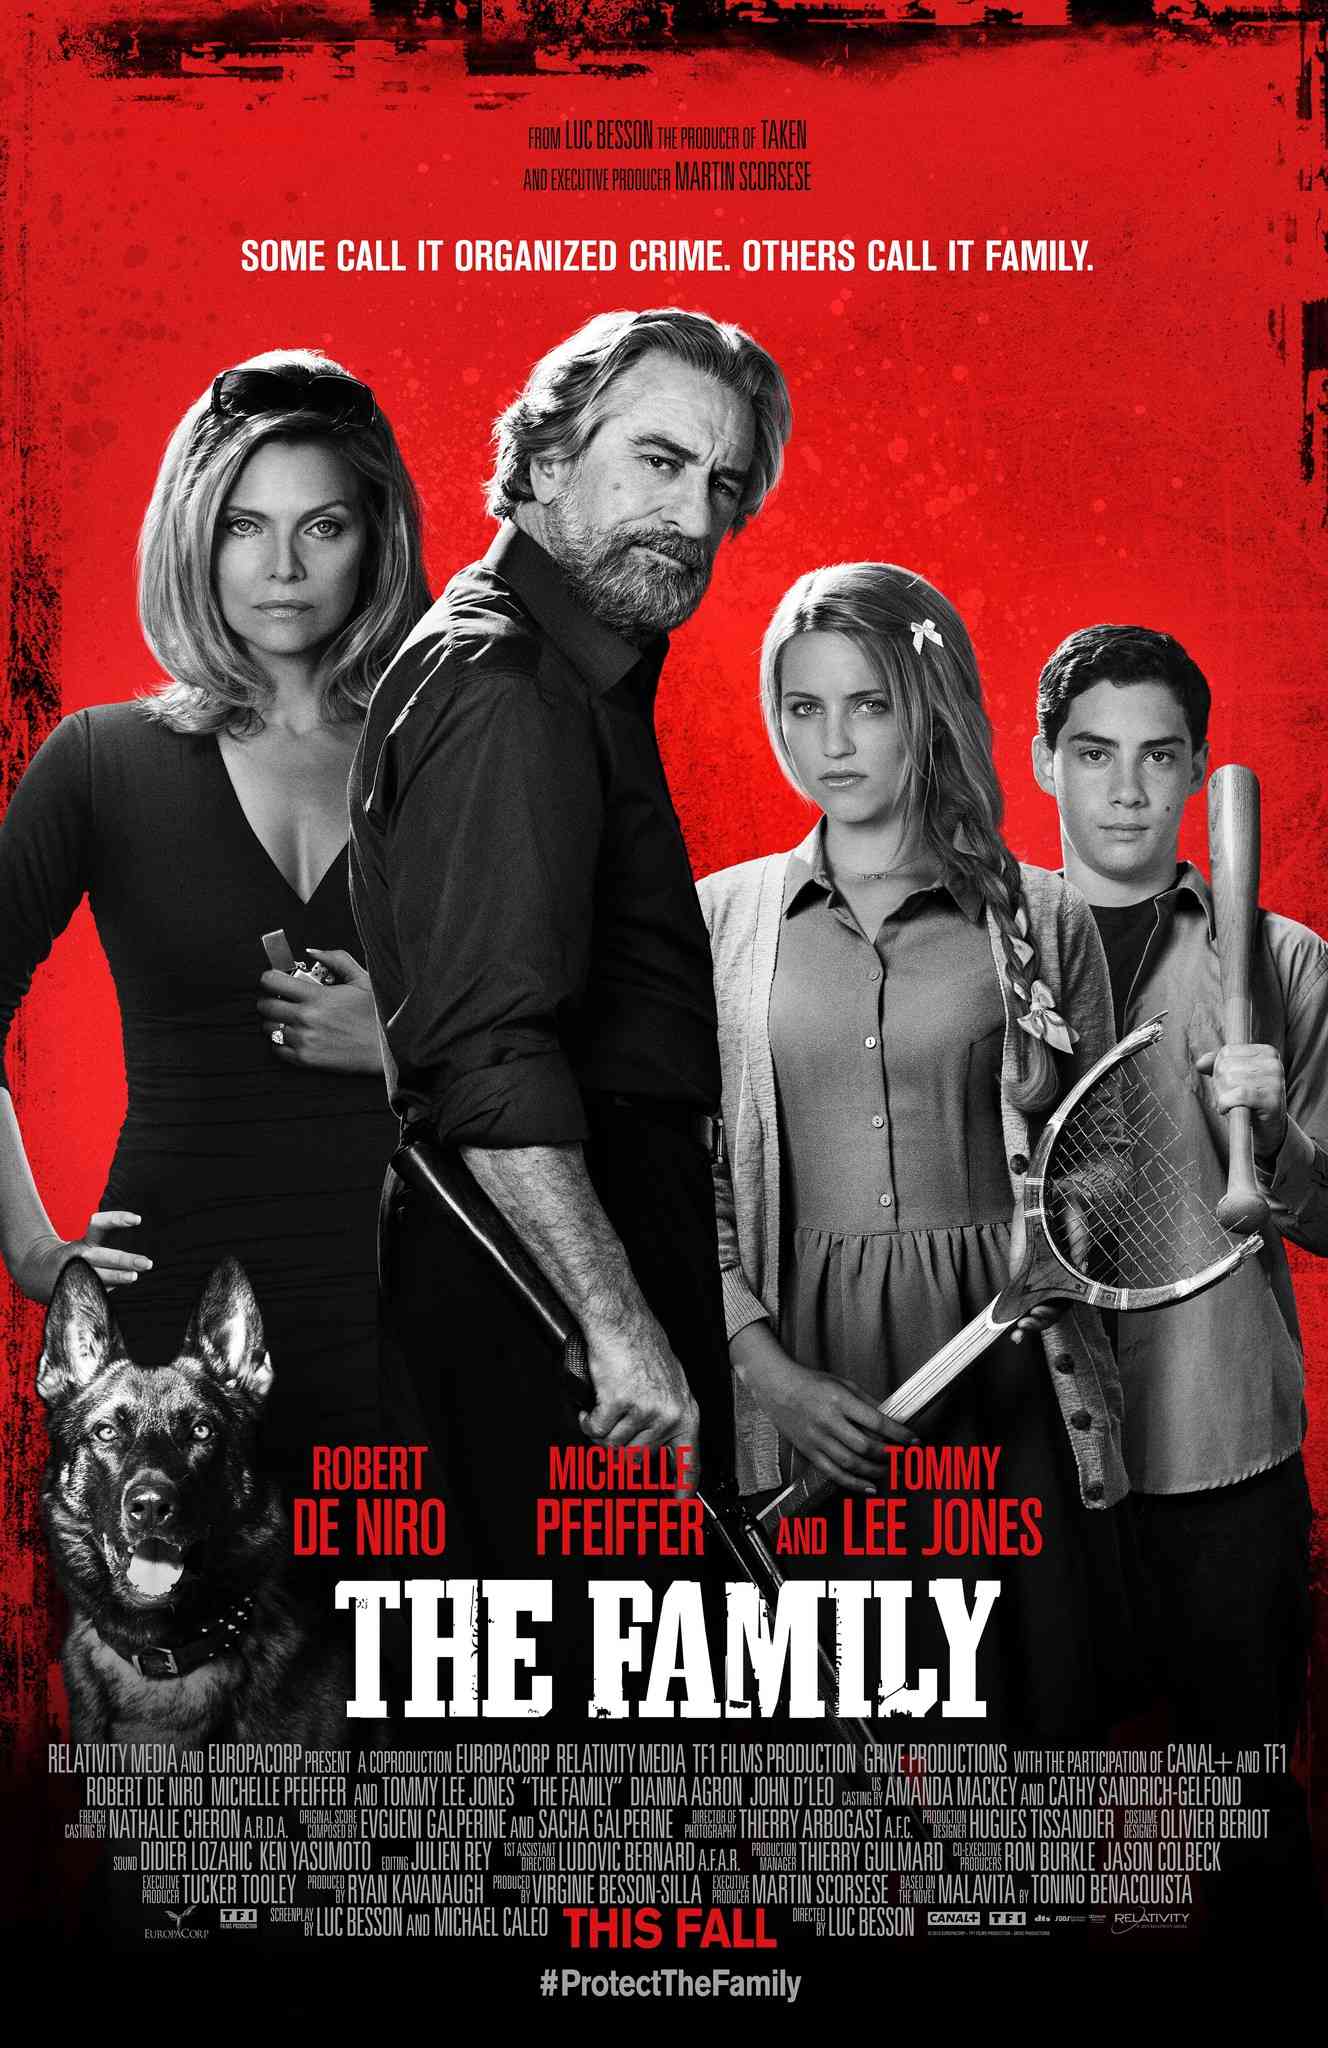 FULL MOVIE: The Family (2013) [Action]